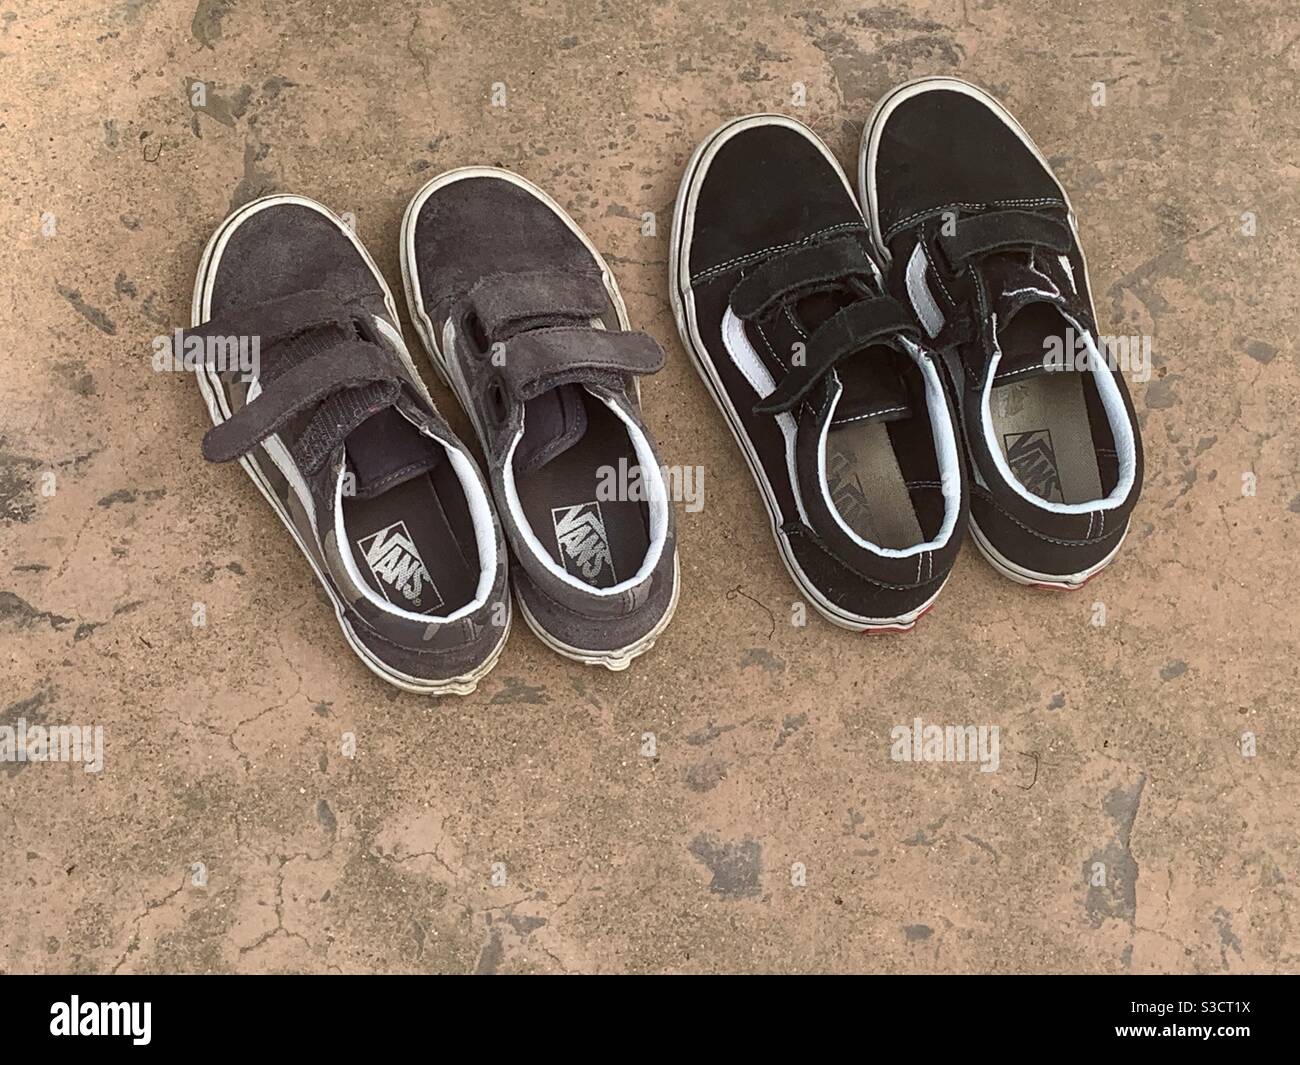 2 pair of vans shoes for kids Stock Photo